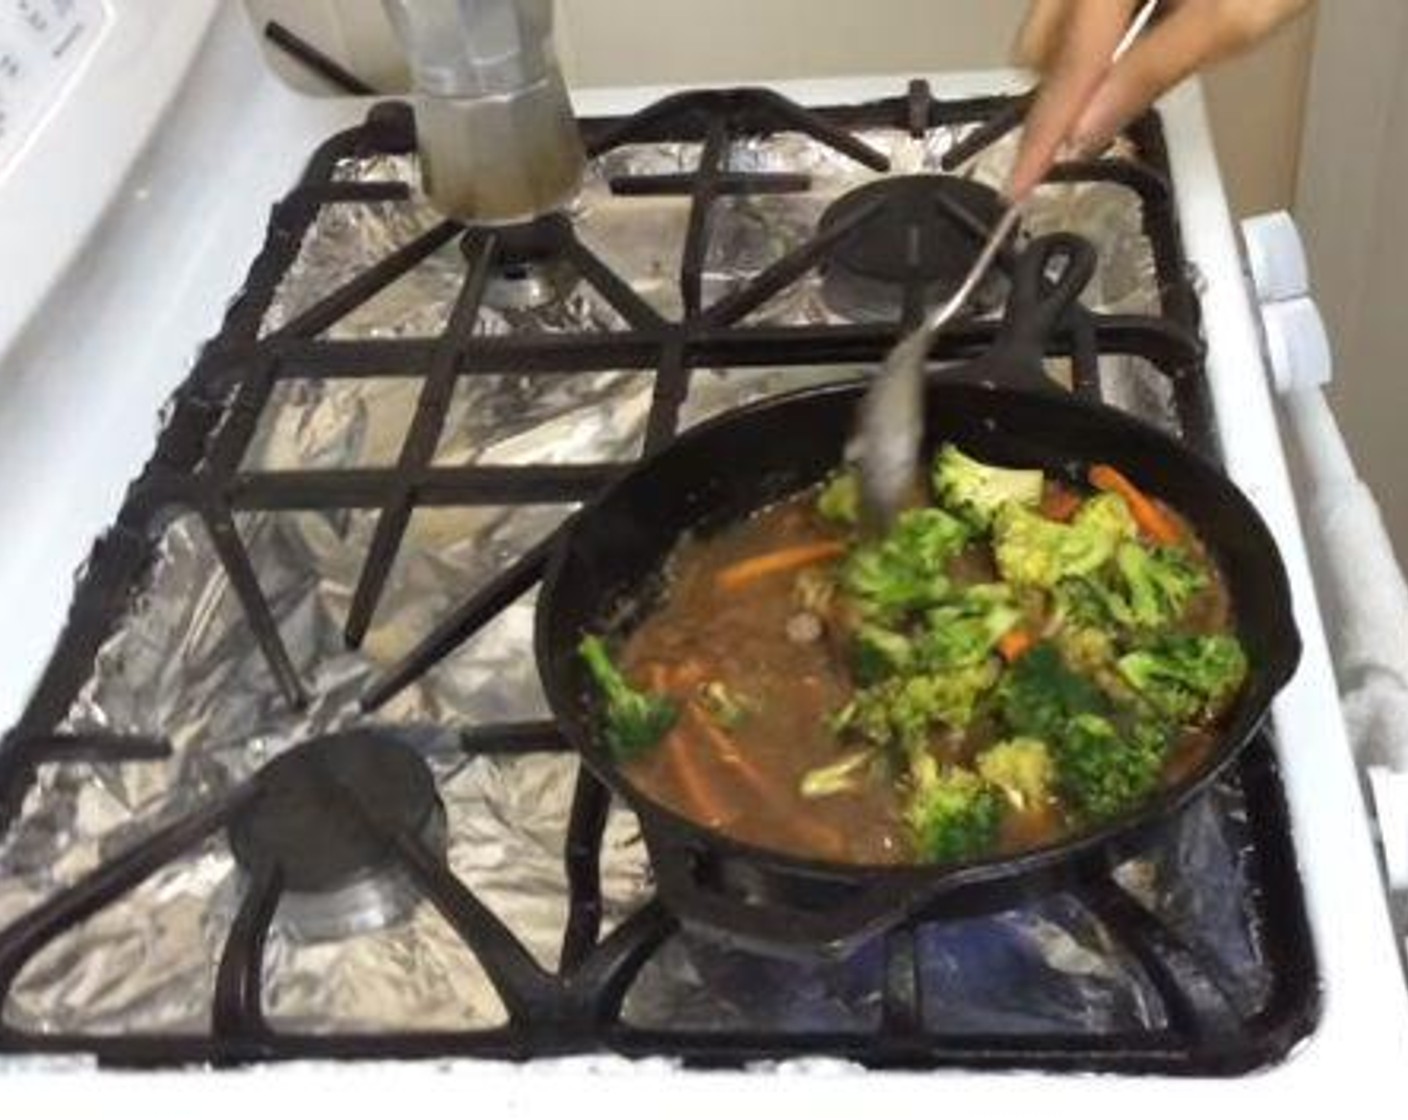 step 4 In the same frying pan, add the remaining Corn Oil (2 Tbsp). Then add in and cook the Broccoli Florets (6 cups), Onion (1), and Carrot (1) for about 5 minutes.